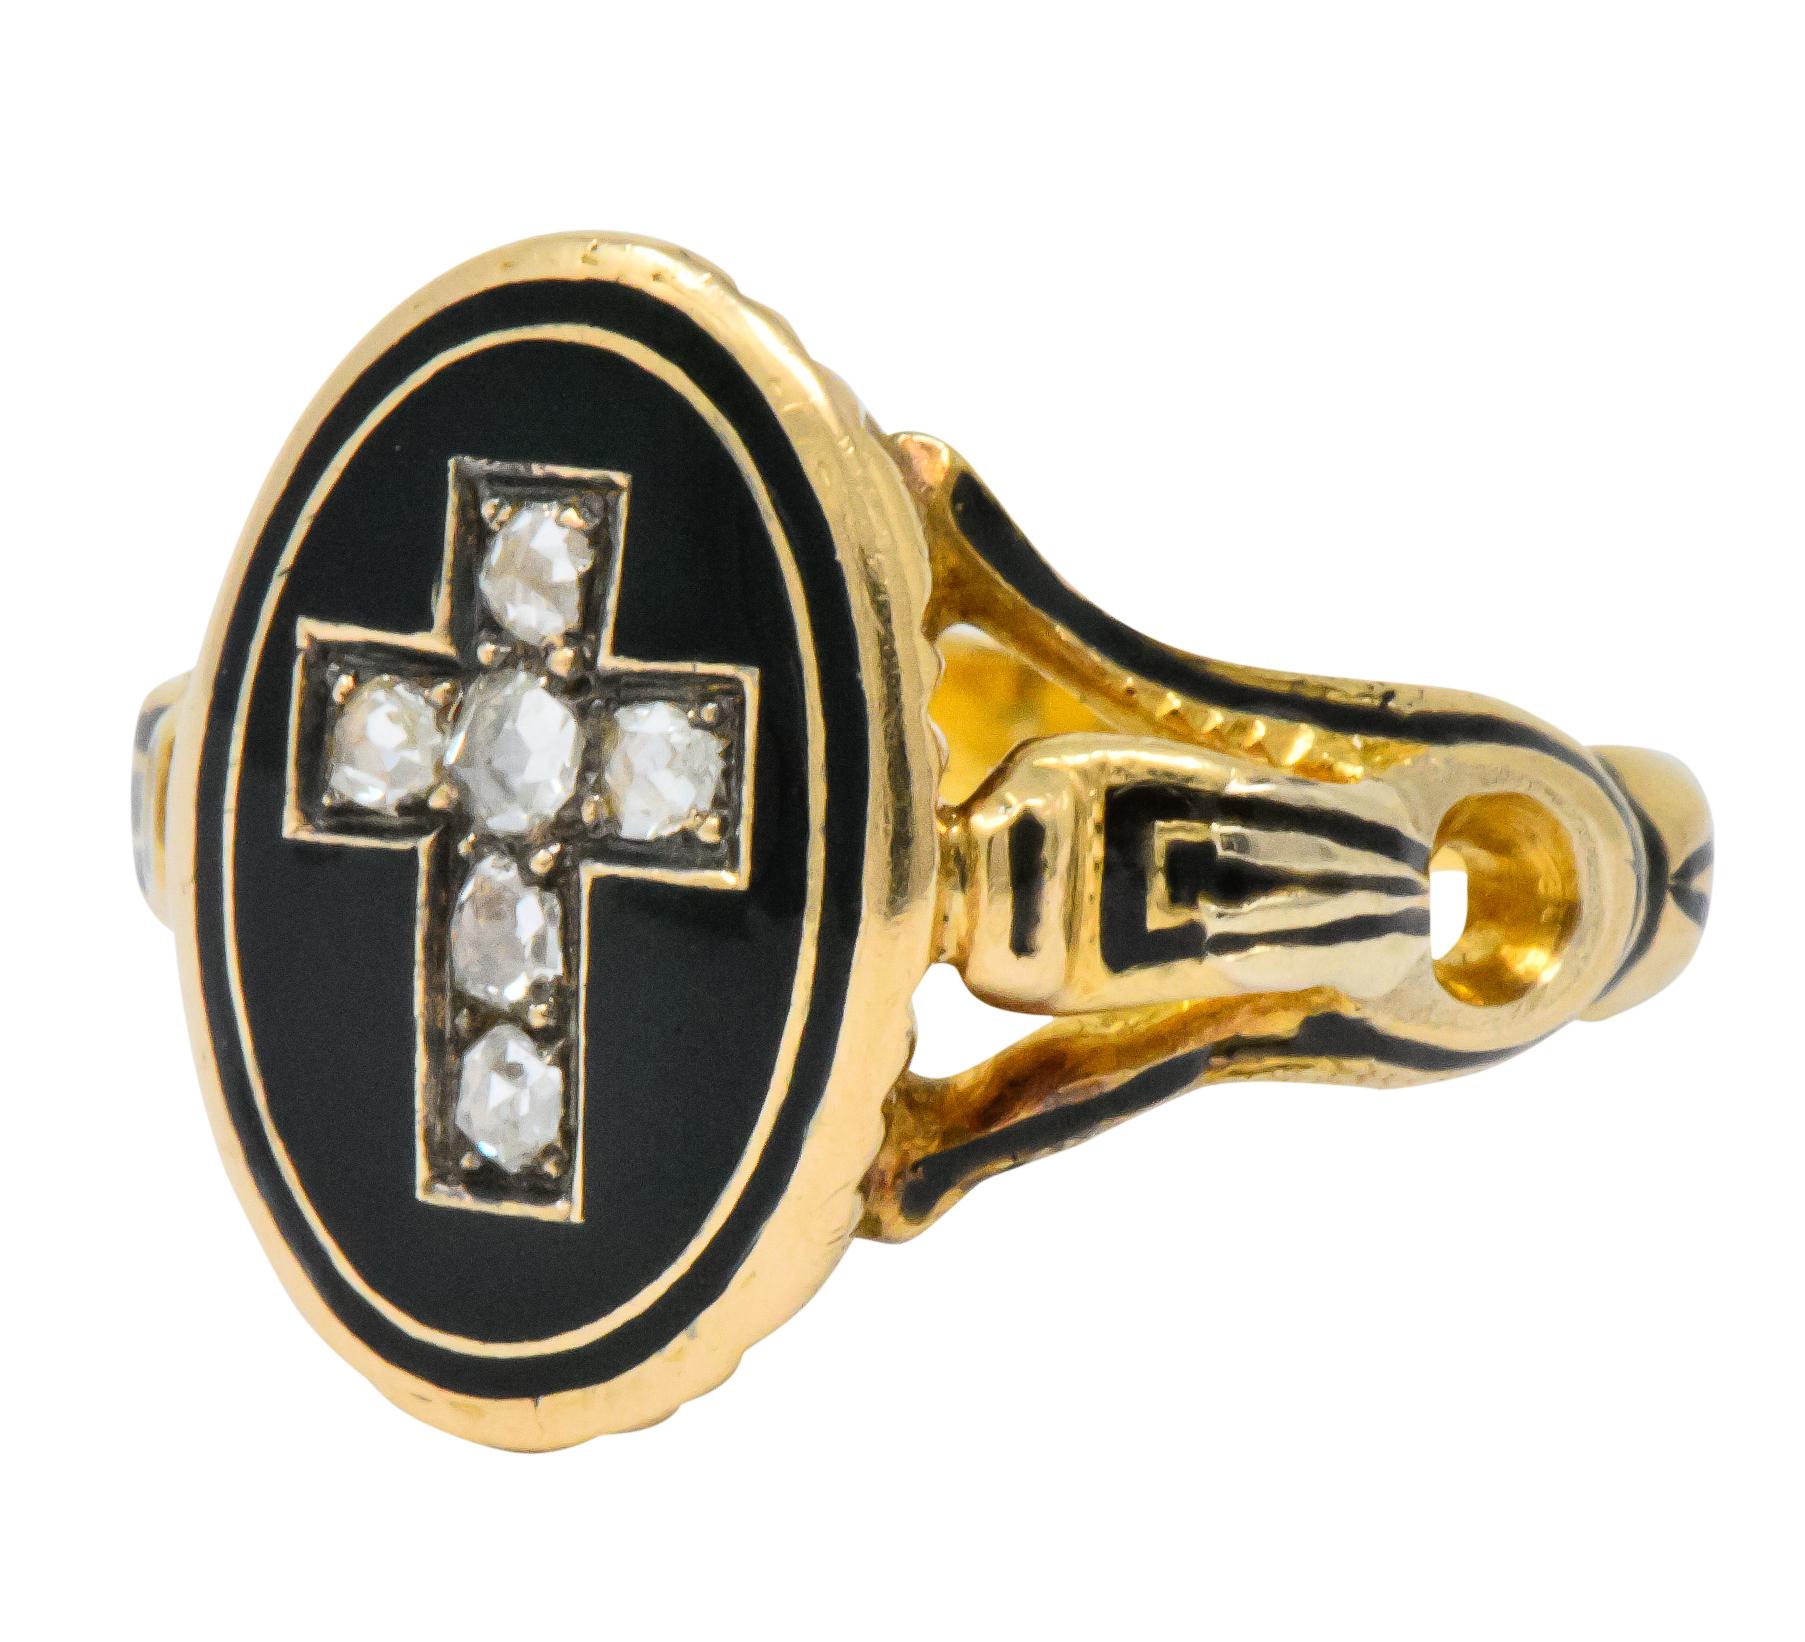 Centering a cross set with six rose cut diamonds

On a surface of black enamel

Pierced shoulders with fancy black enamel detail

Inside engraved with “P.F.S. to C.P.F Nov 25 1868”

Tested as 14 karat gold

Ring Size: 4 

Top measures 14..5 mm and